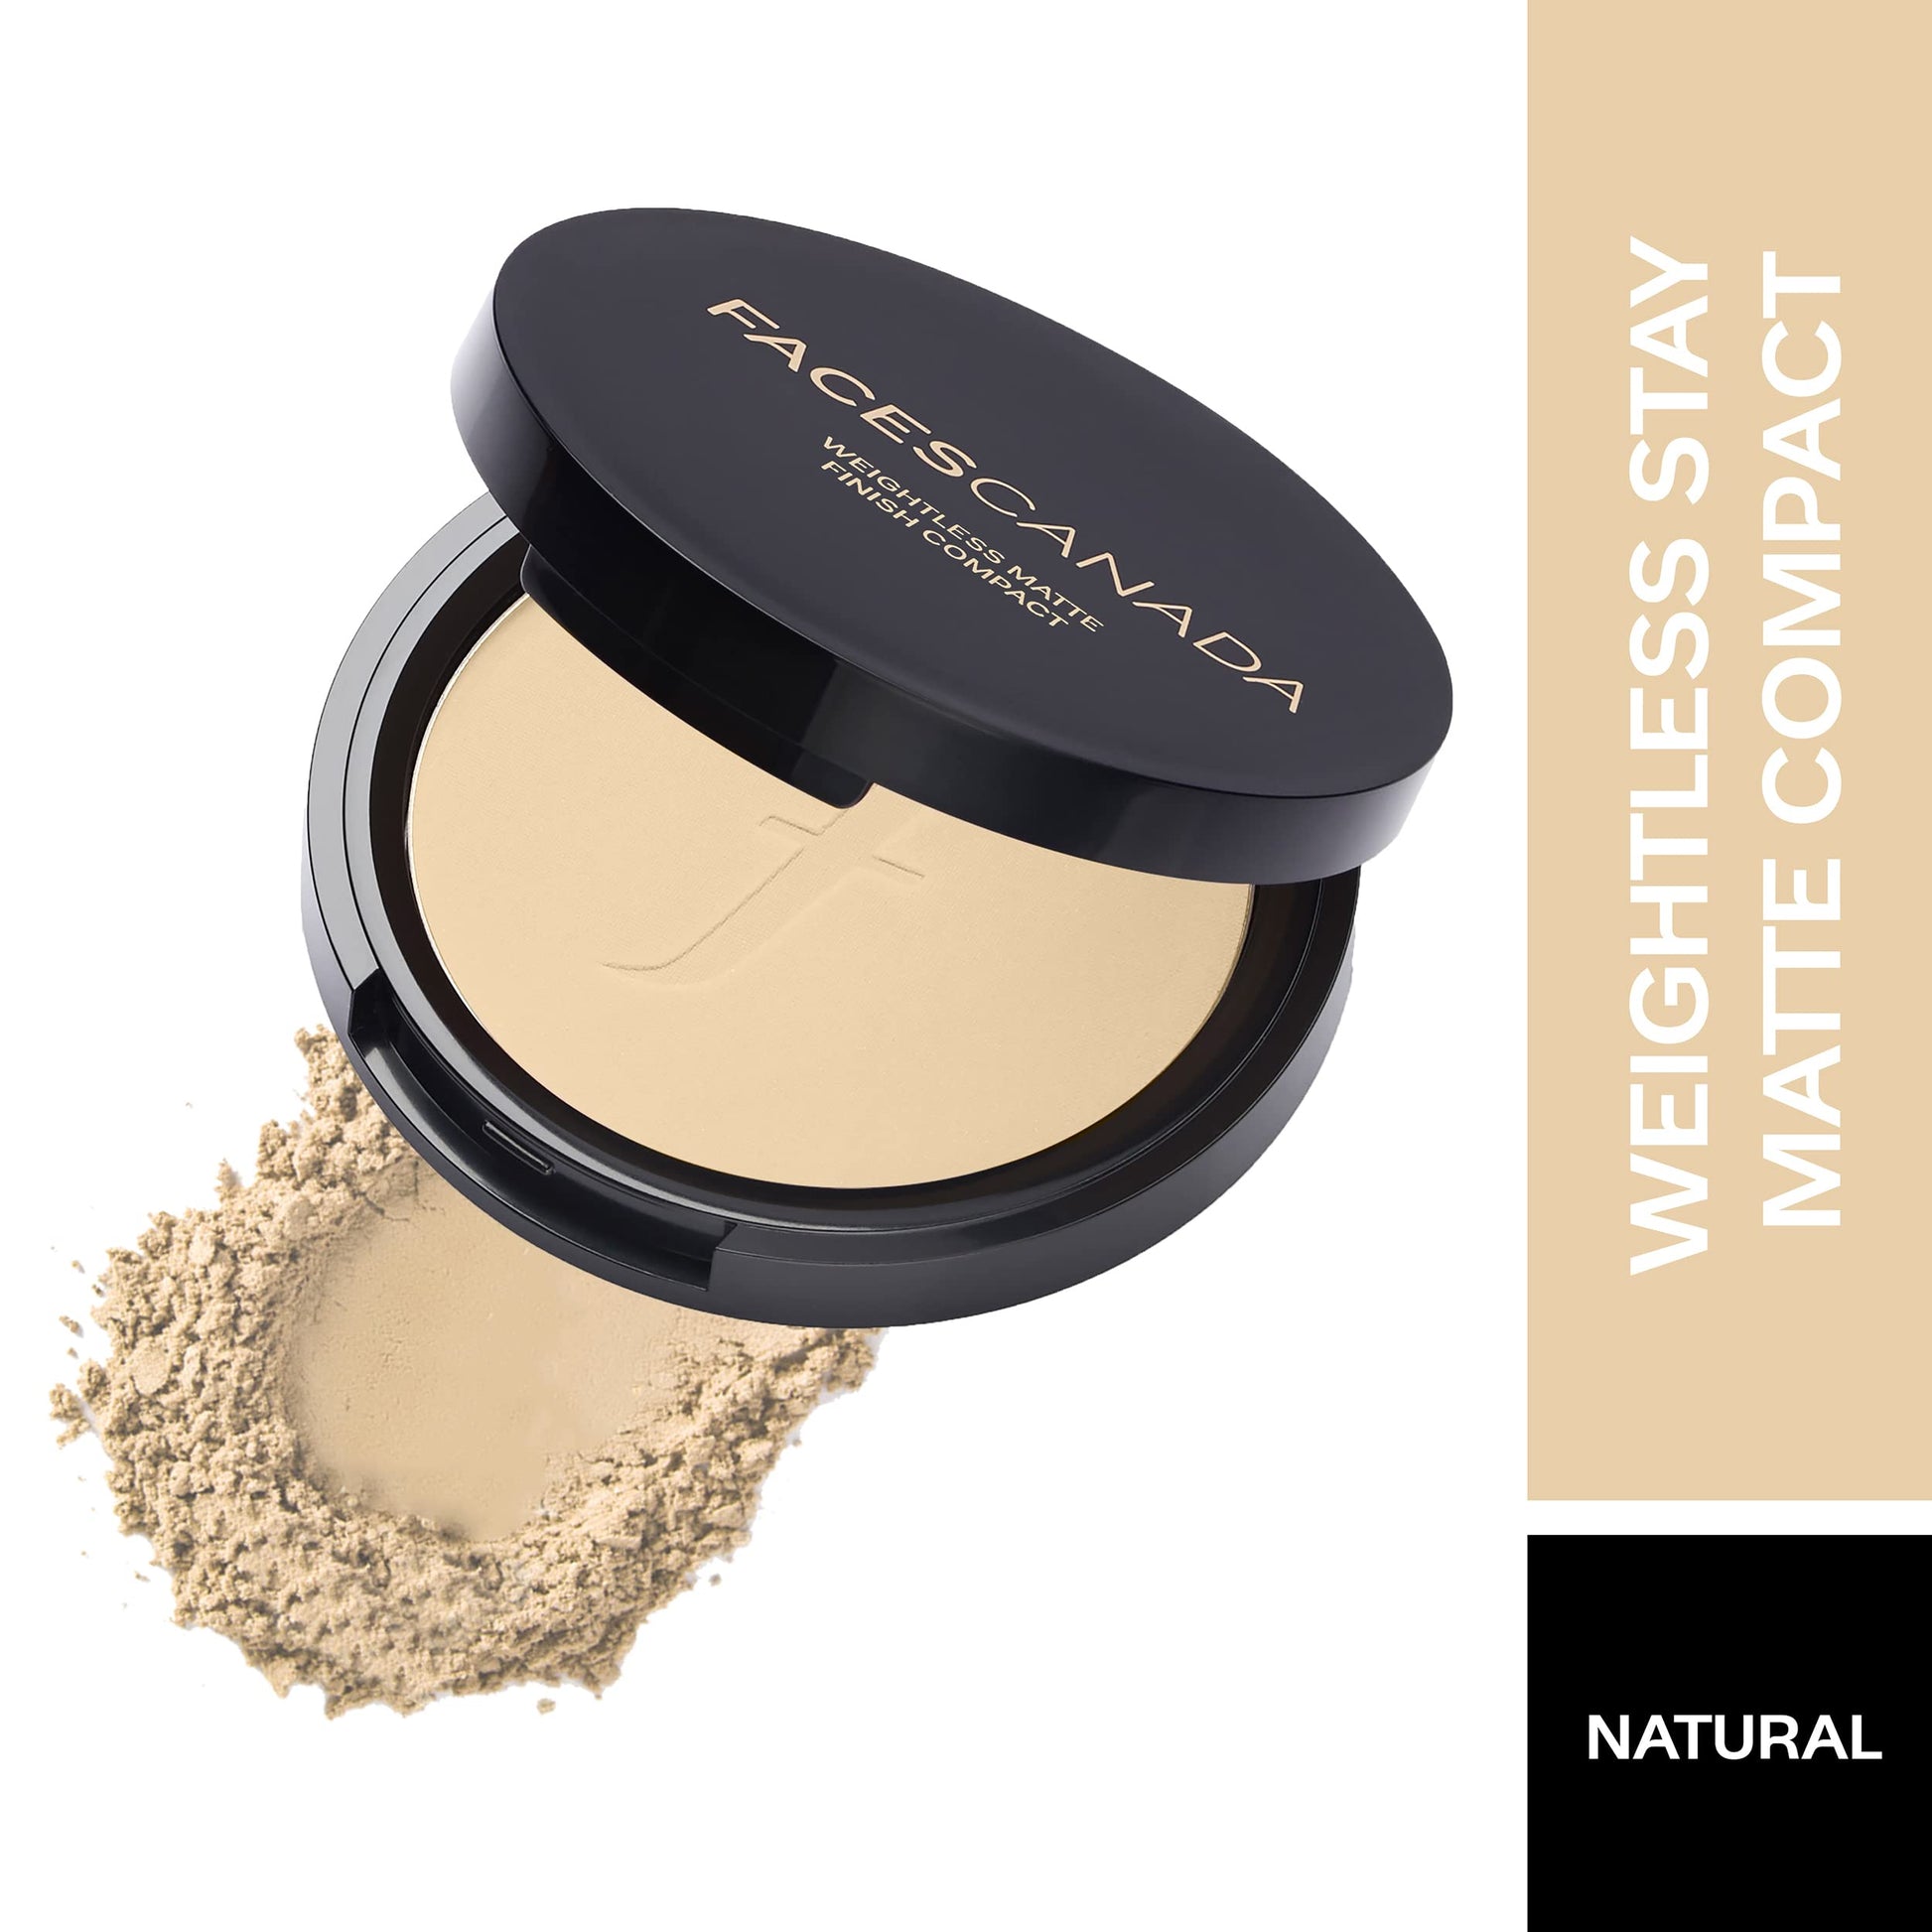 Faces Canada Weightless Stay Matte Compact Vitamin E & Shea Butter, Spf 20 Natural 02, 9 g & Faces Canada Weightless Matte Finish Foundation Mini 18 ml, Ivory 01, 1 count 